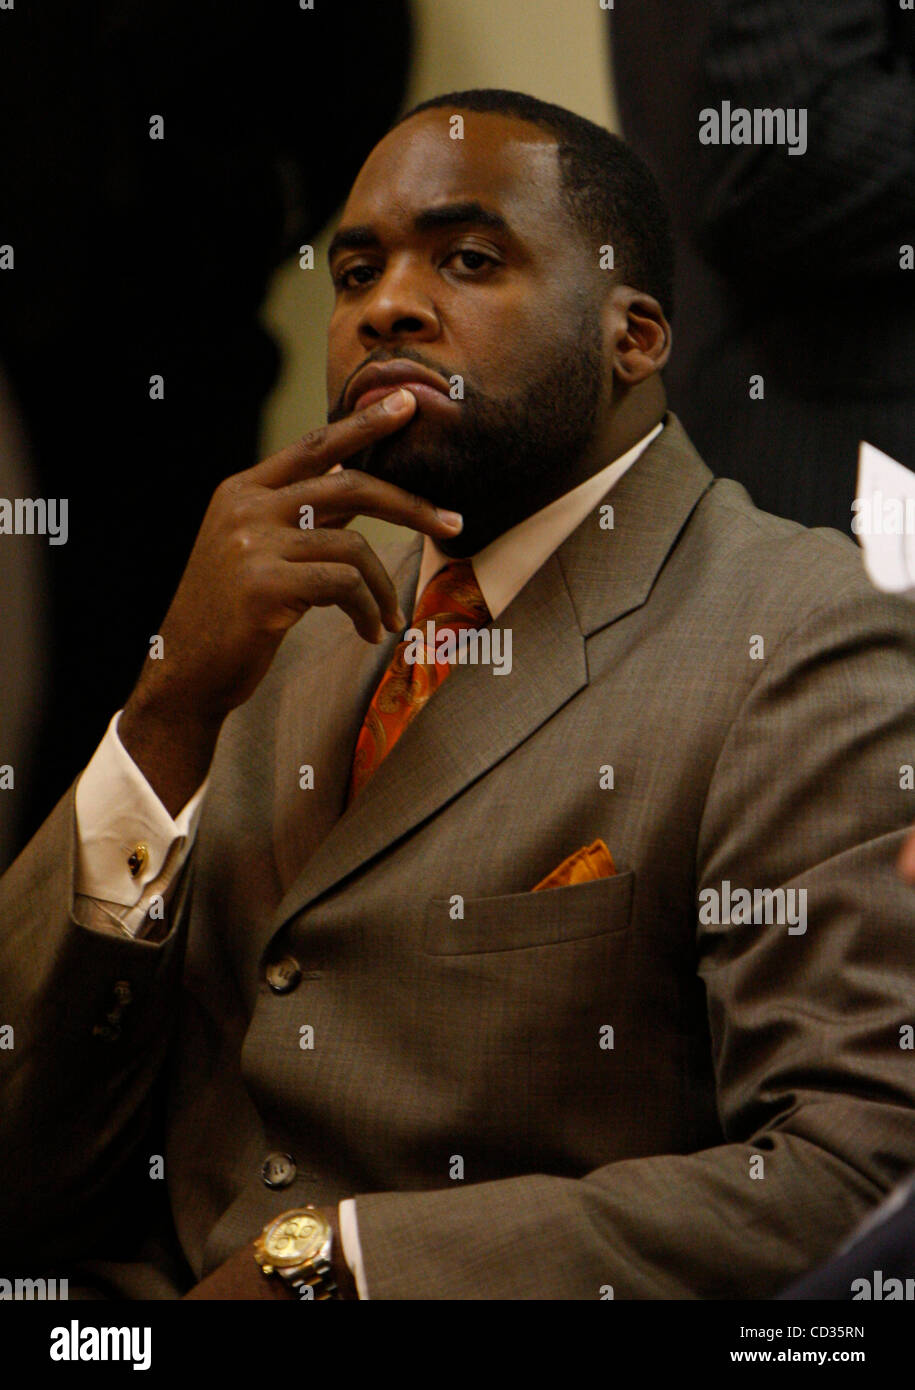 Apr 11, 2008 - Detroit, Michigan, USA - Detroit Mayor KWAME KILPATRICK in 36th District Judge Paula Humphries for a bond hearing on Friday, April 11, 2008. Kilpatrick is awaiting a June 9 preliminary examination perjury and other charges. (Credit Image: © Jeff Kowalsky/ZUMA Press) Stock Photo